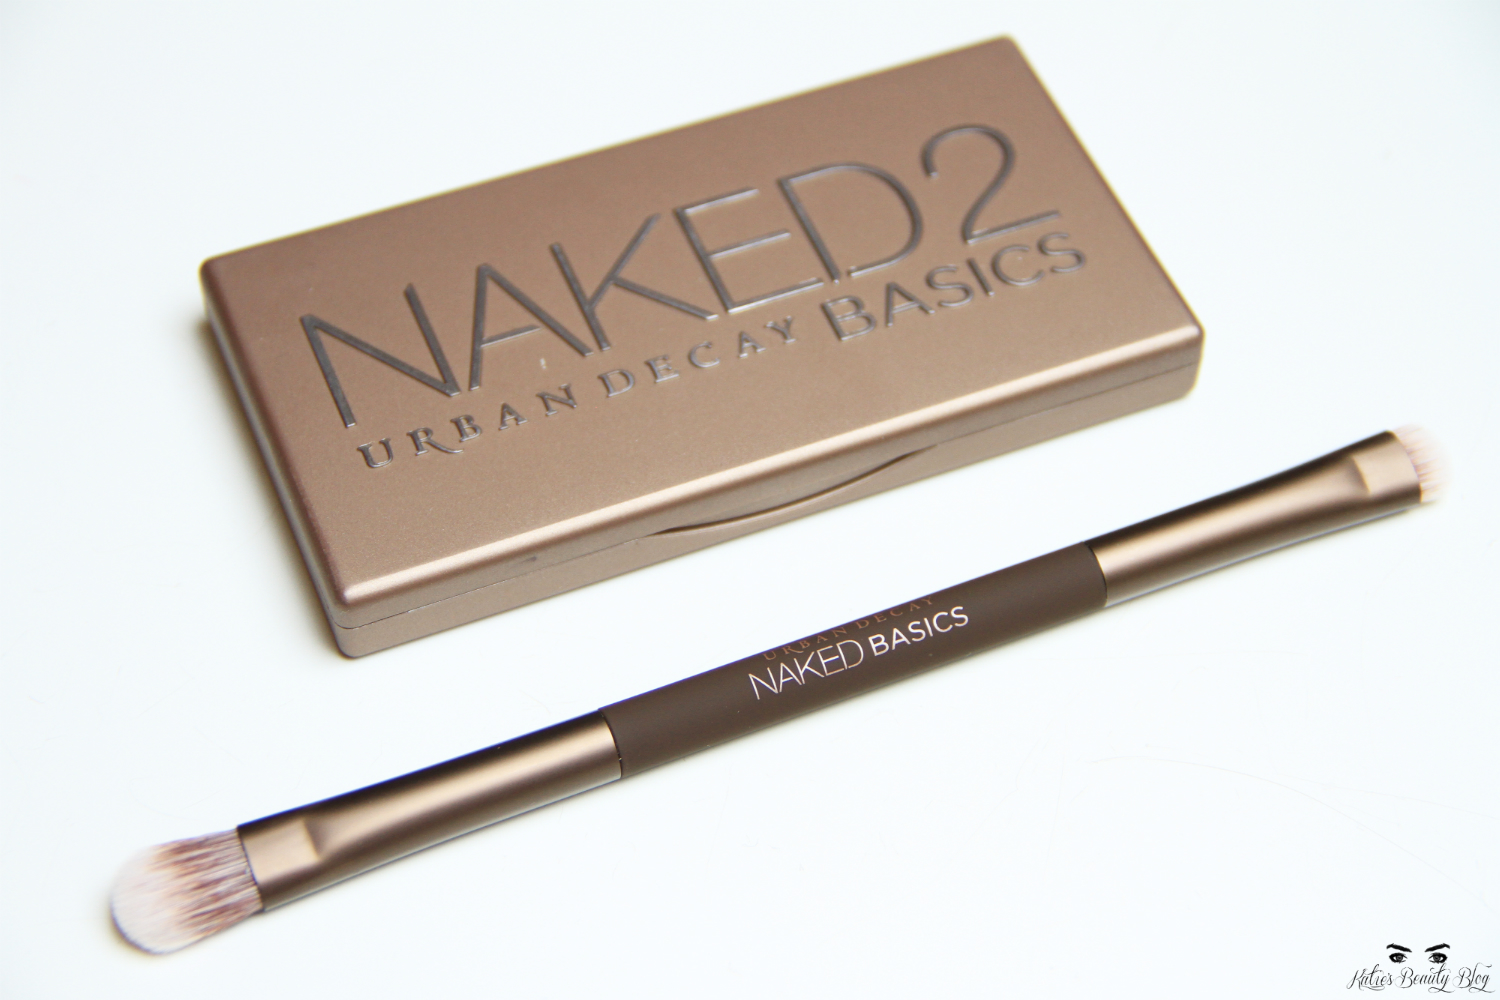 REVIEW: Urban Decay Naked Basics 2 Palette Swatches!